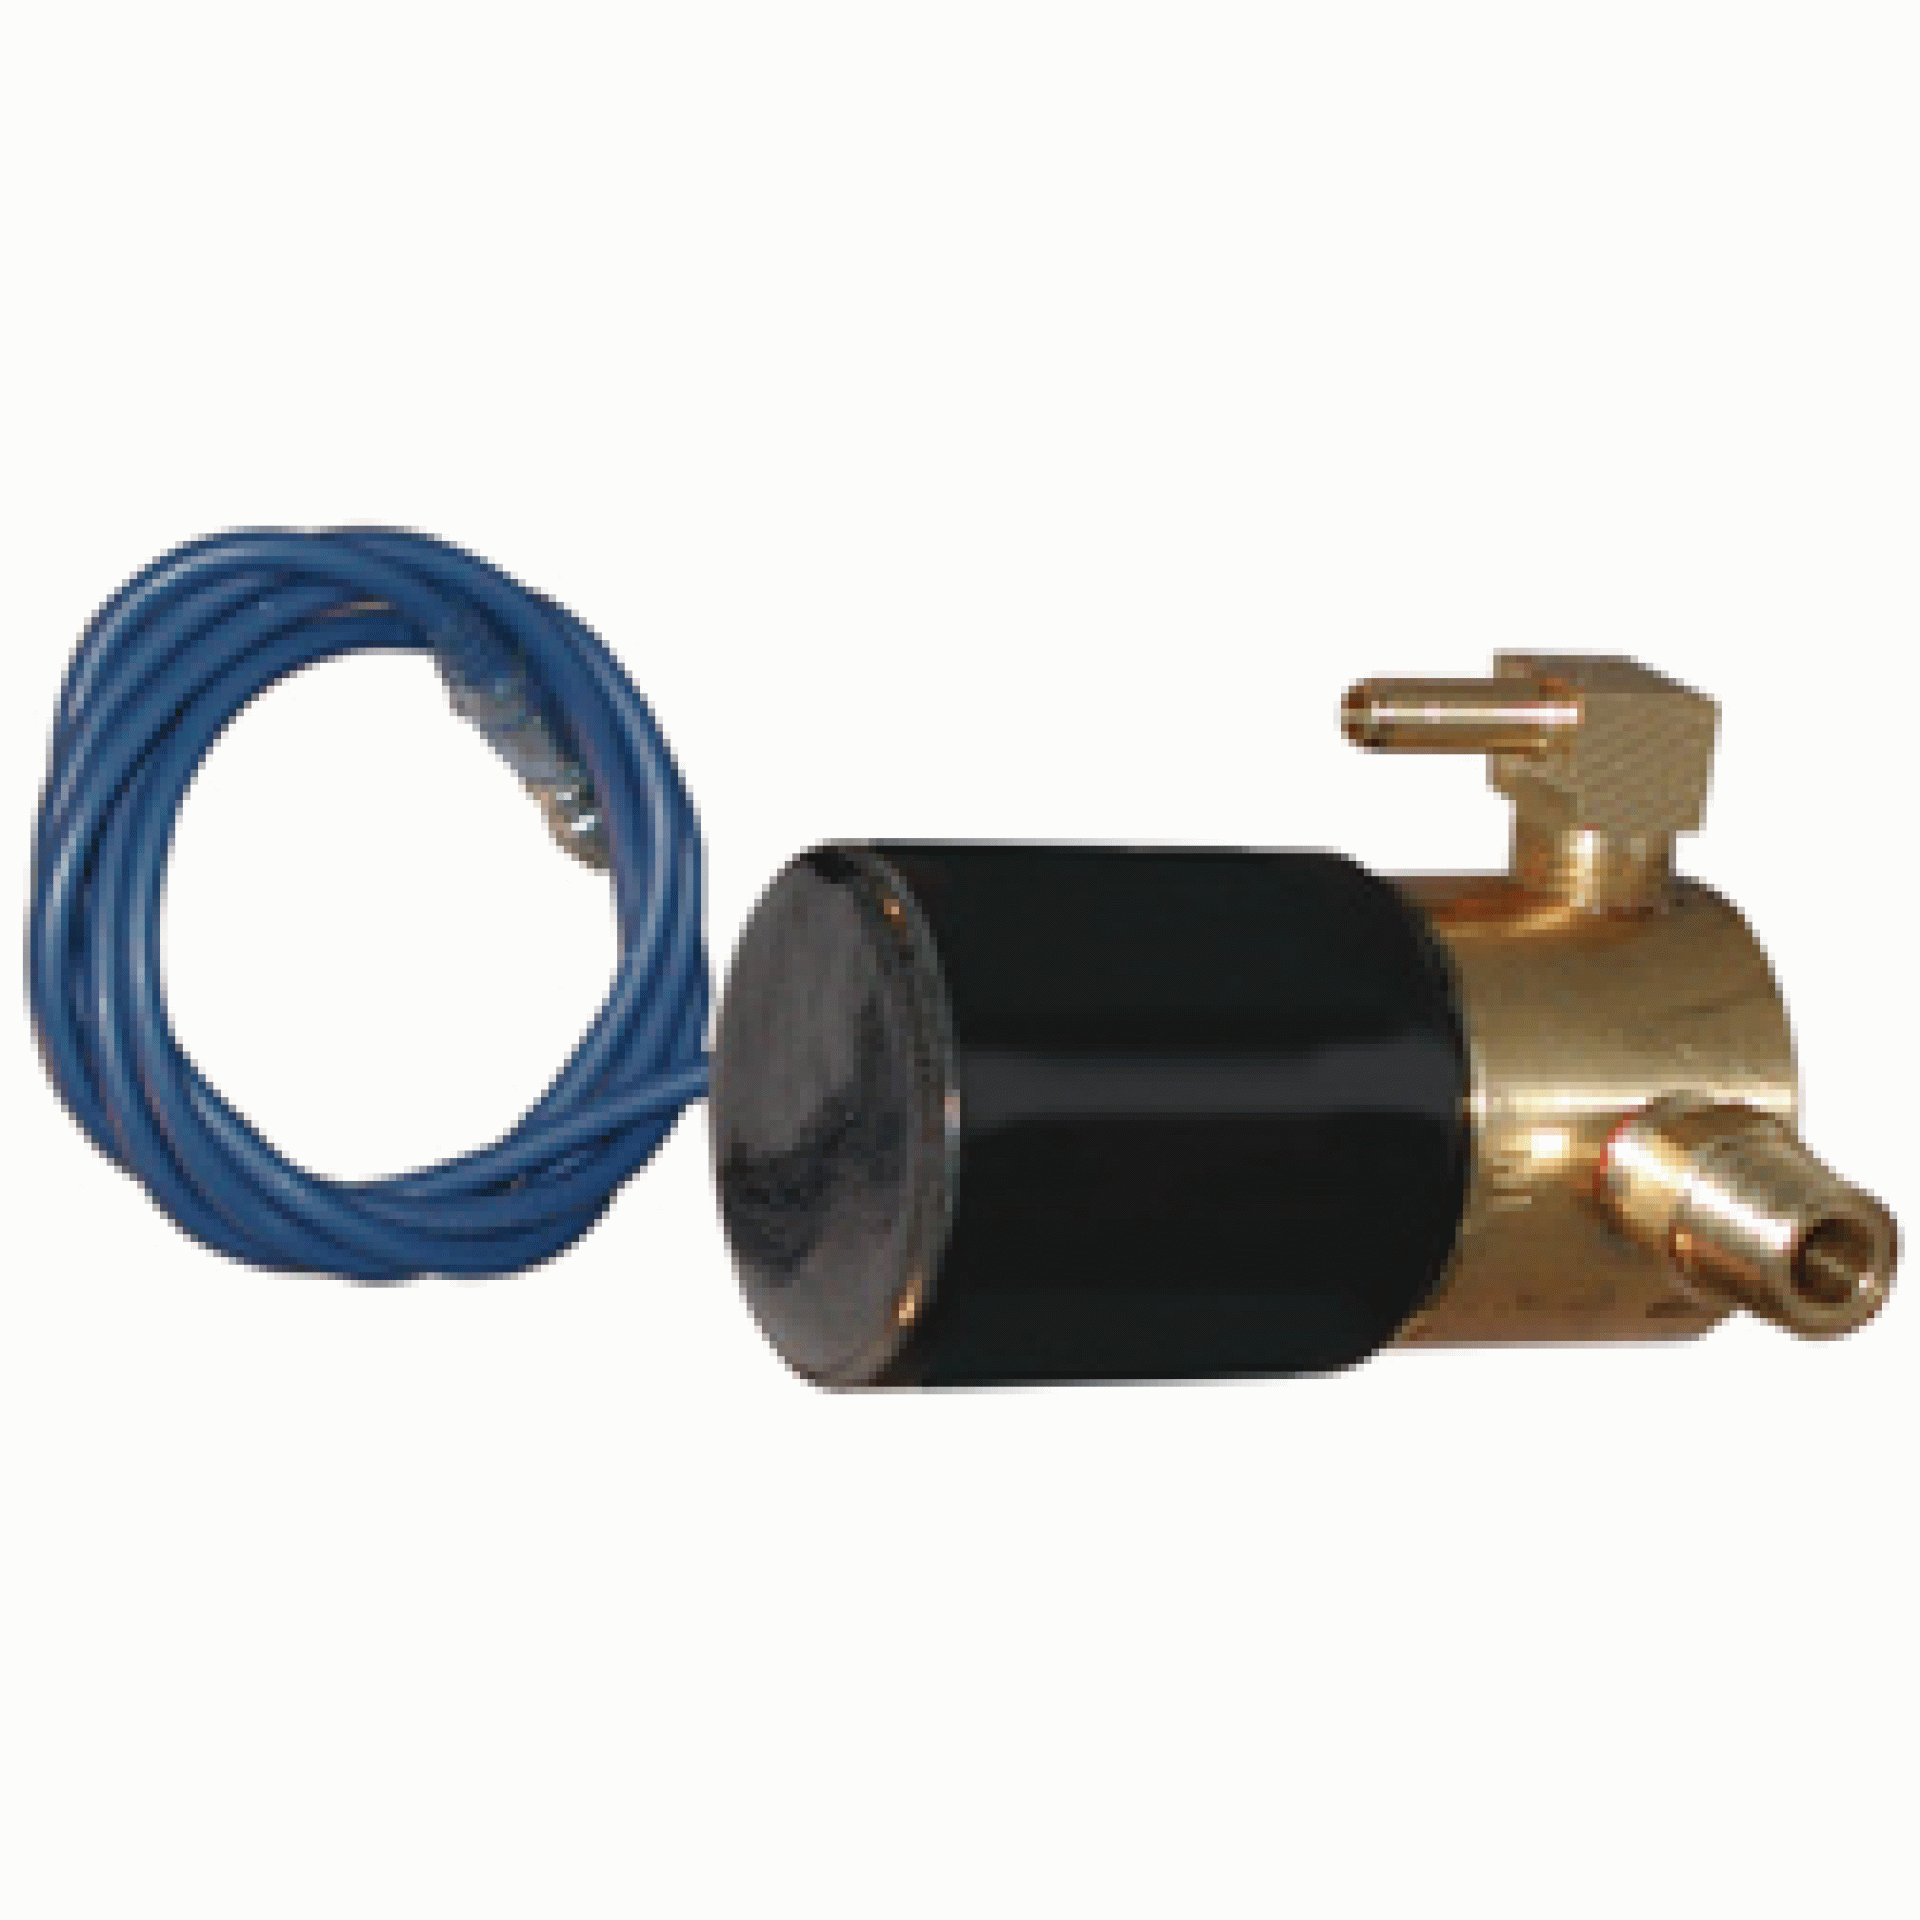 DEXTER MARINE PRODUCTS OF GEORGIA LC | 11253A | SOLENOID KIT - BACK FLOW FOR ACTUATORS